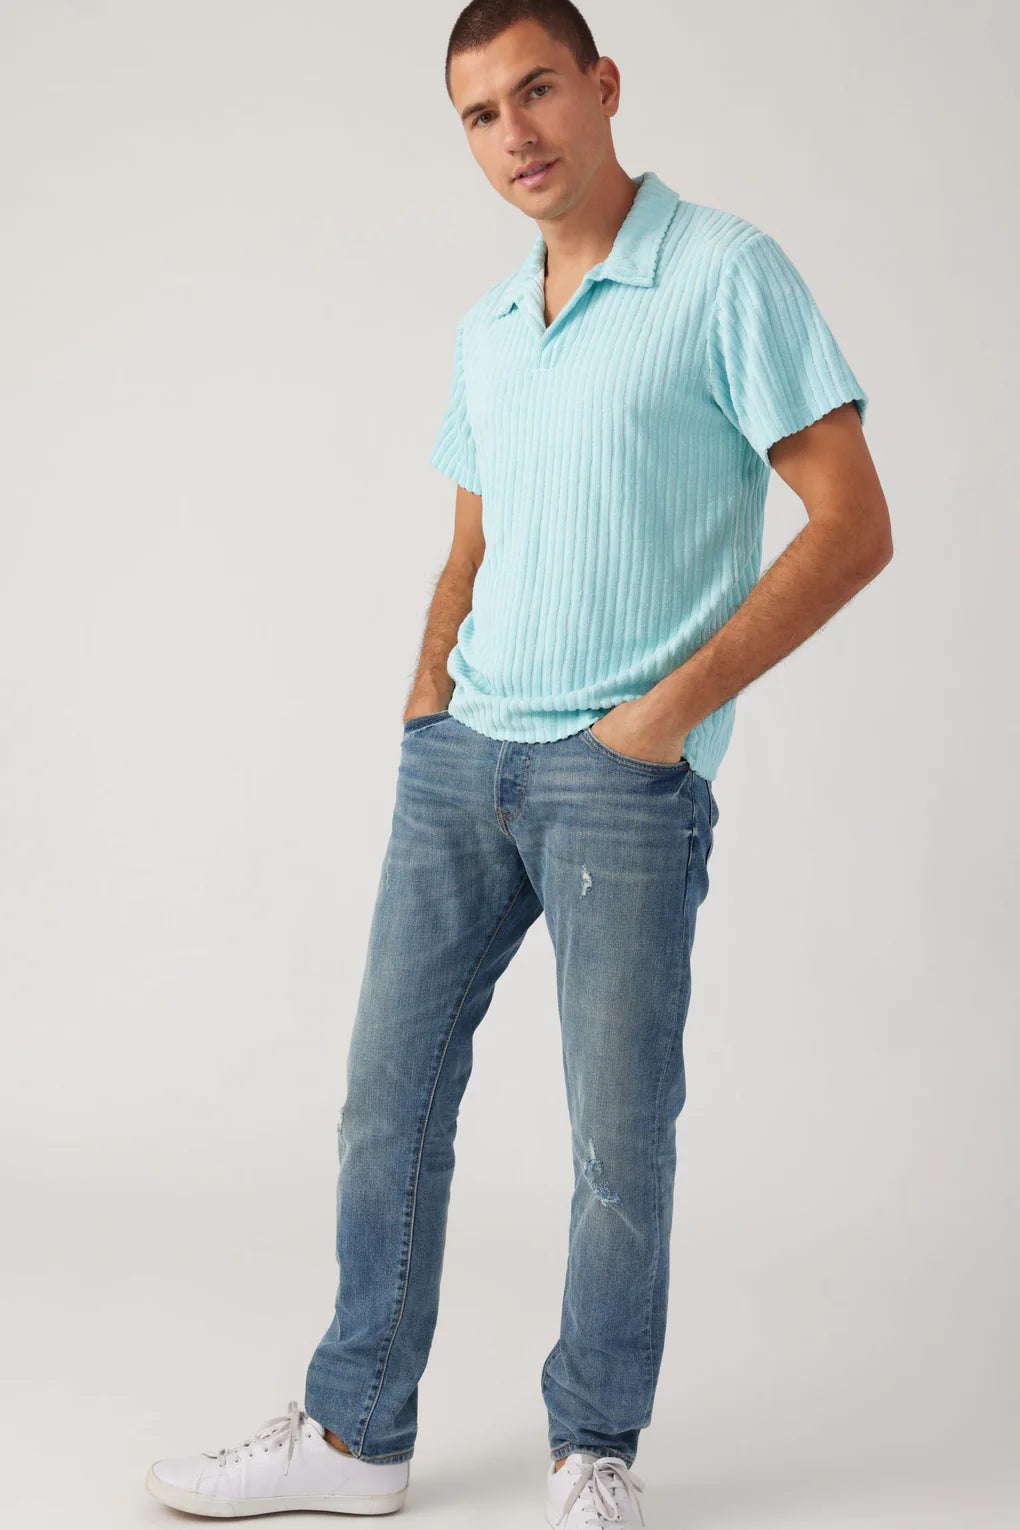 SOL ANGELES MENS RIVIERA TERRY POLO - 2 COLORS